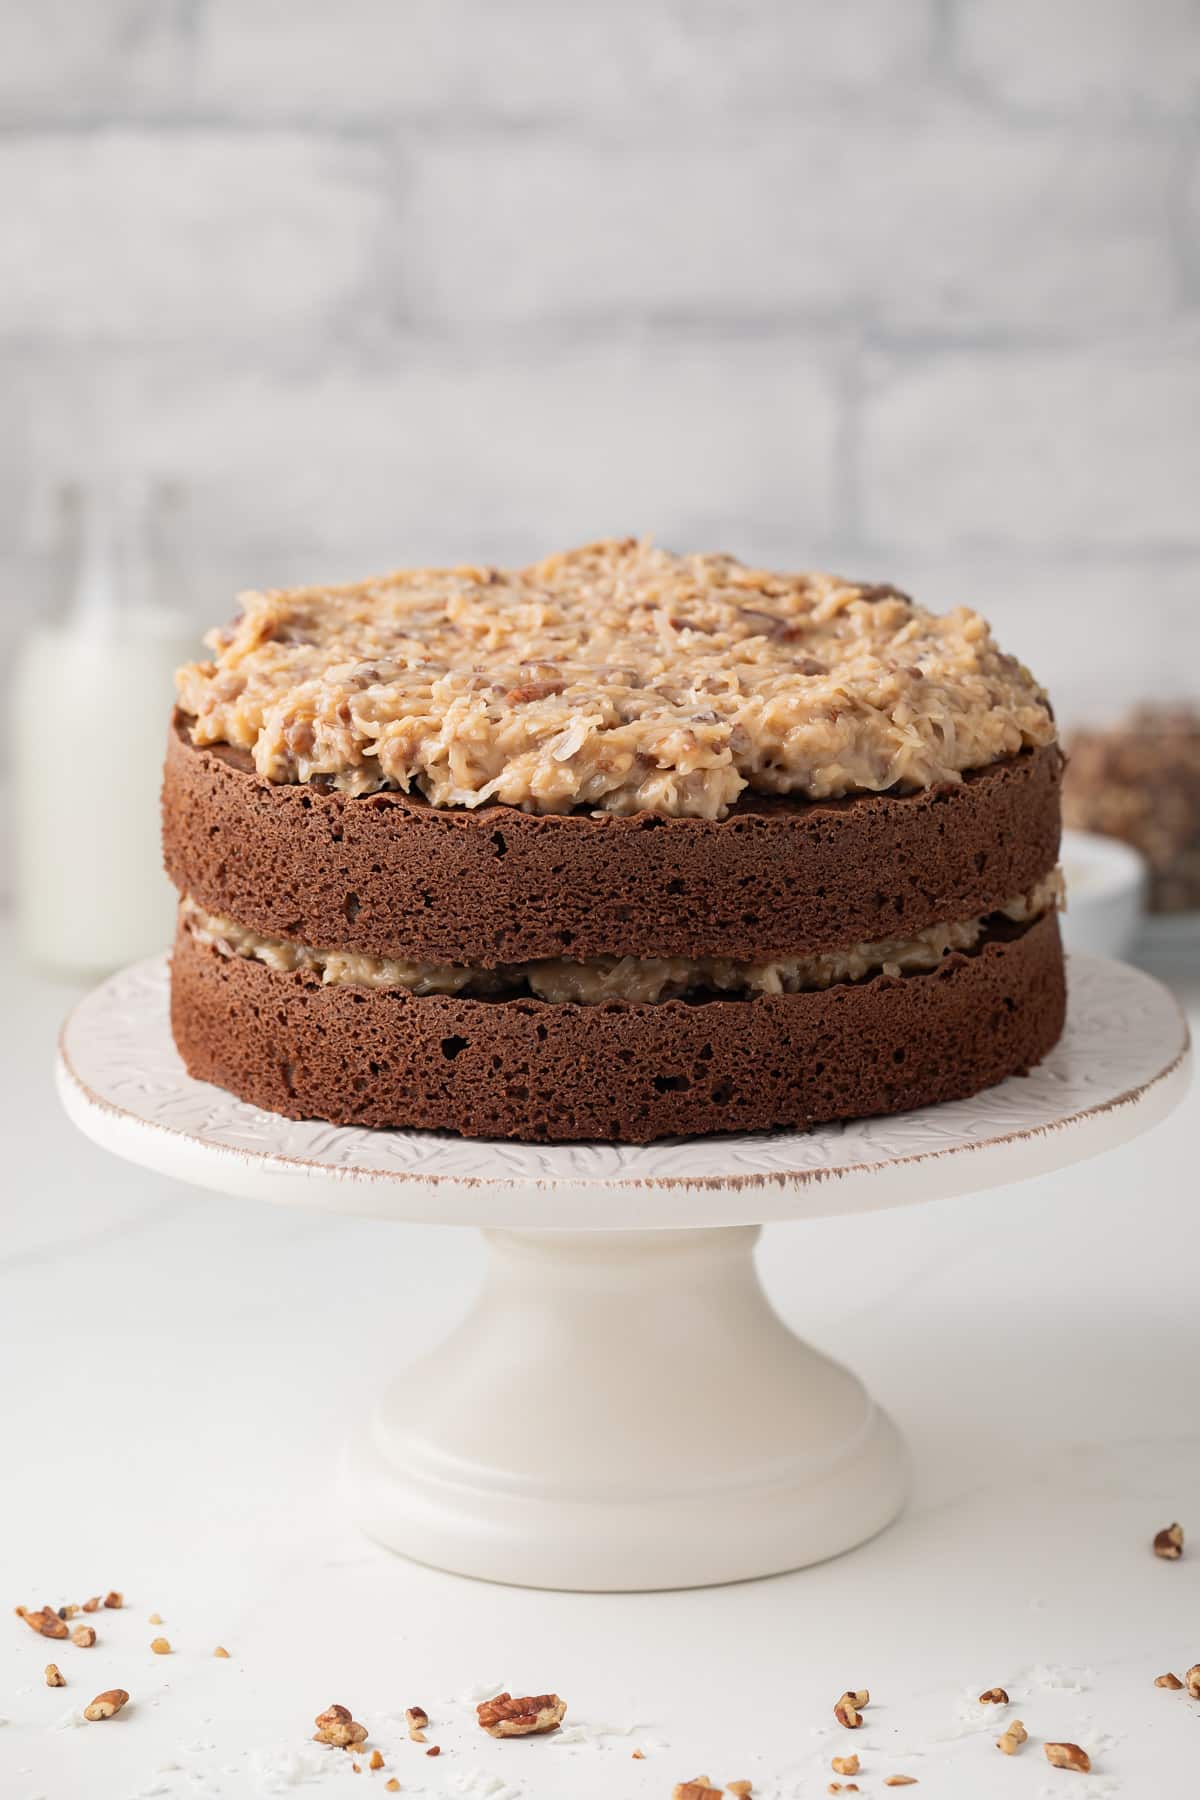 Side view of German chocolate cake on cake stand.